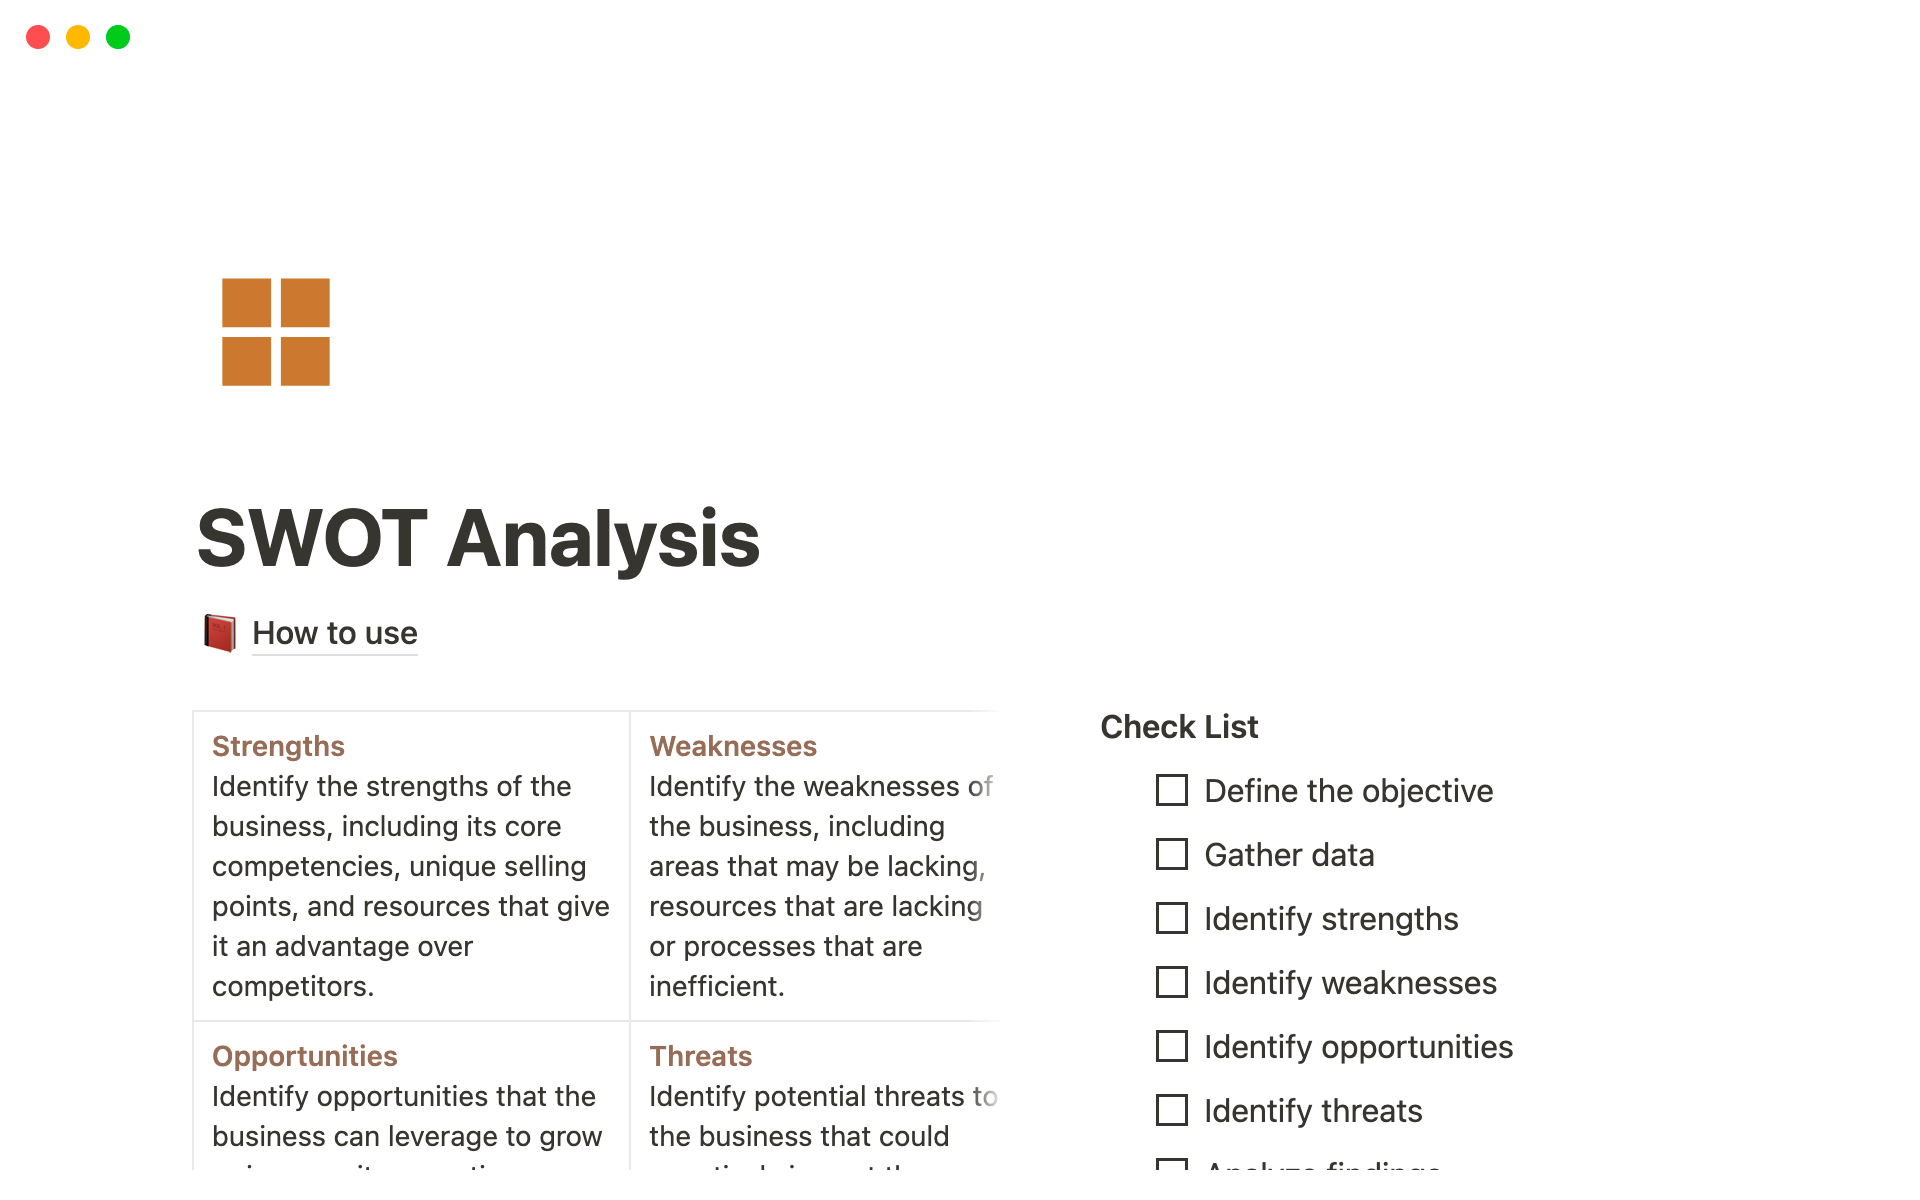 Screenshot of Top SWOT Analysis Templates for Facilities Managers collection by Notion